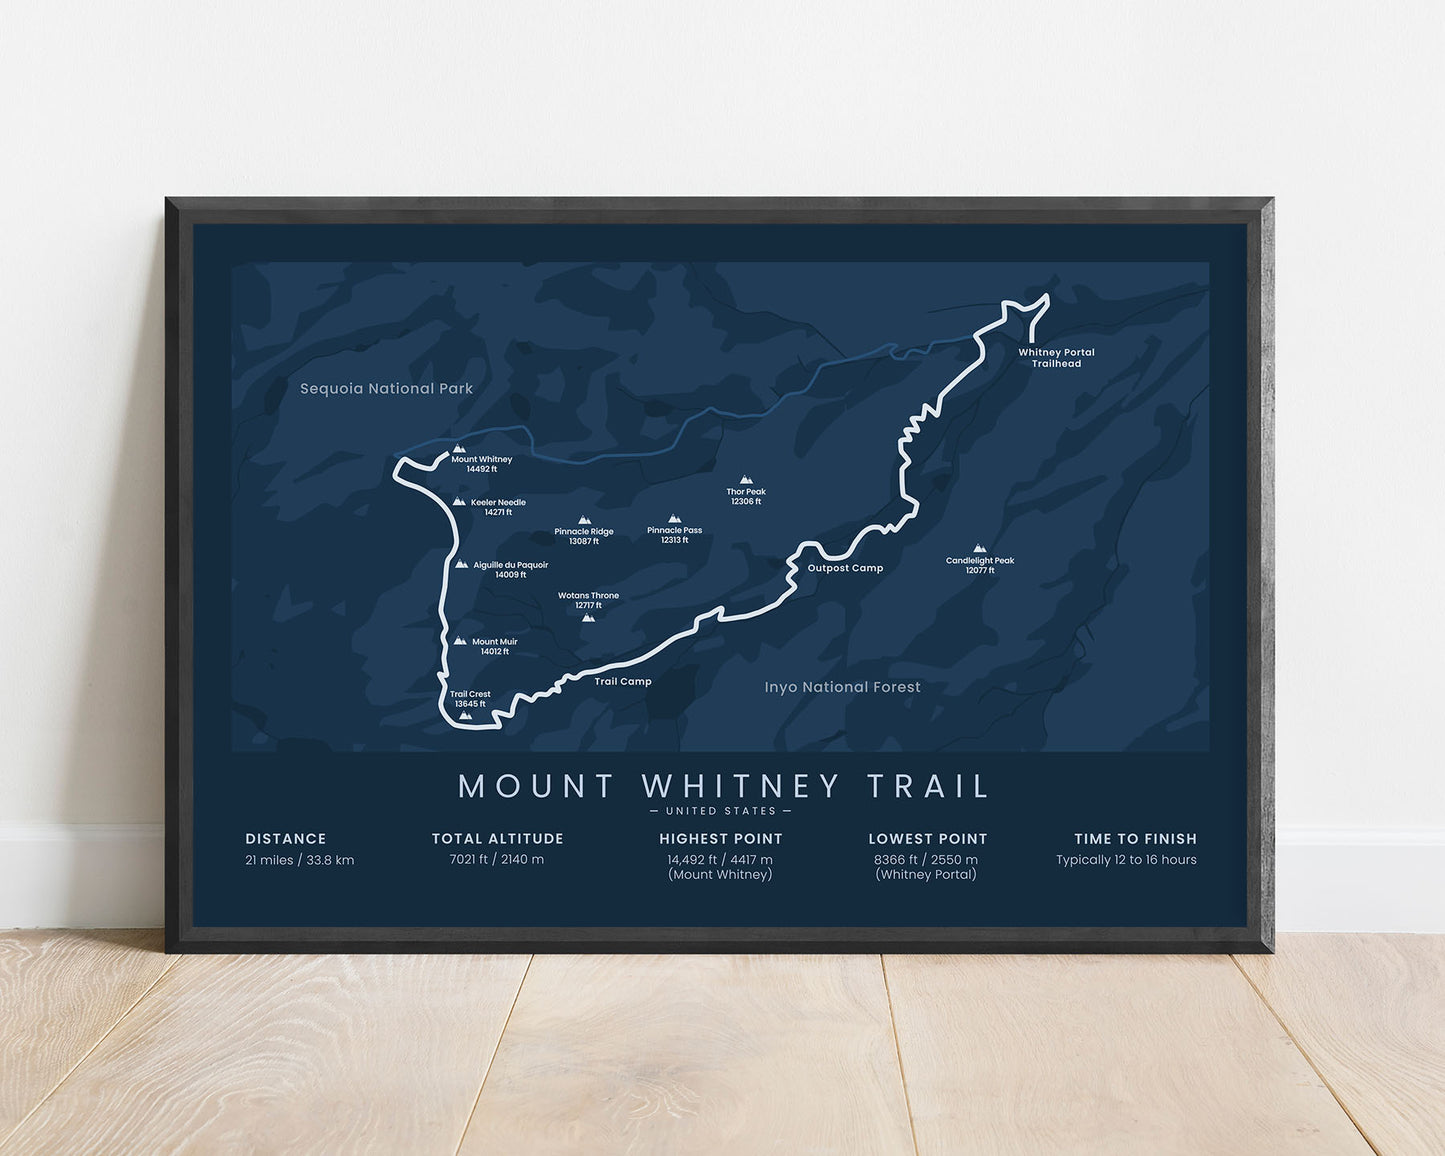 Mount Whitney Hike (Sequoia National Park) Map Print with blue background